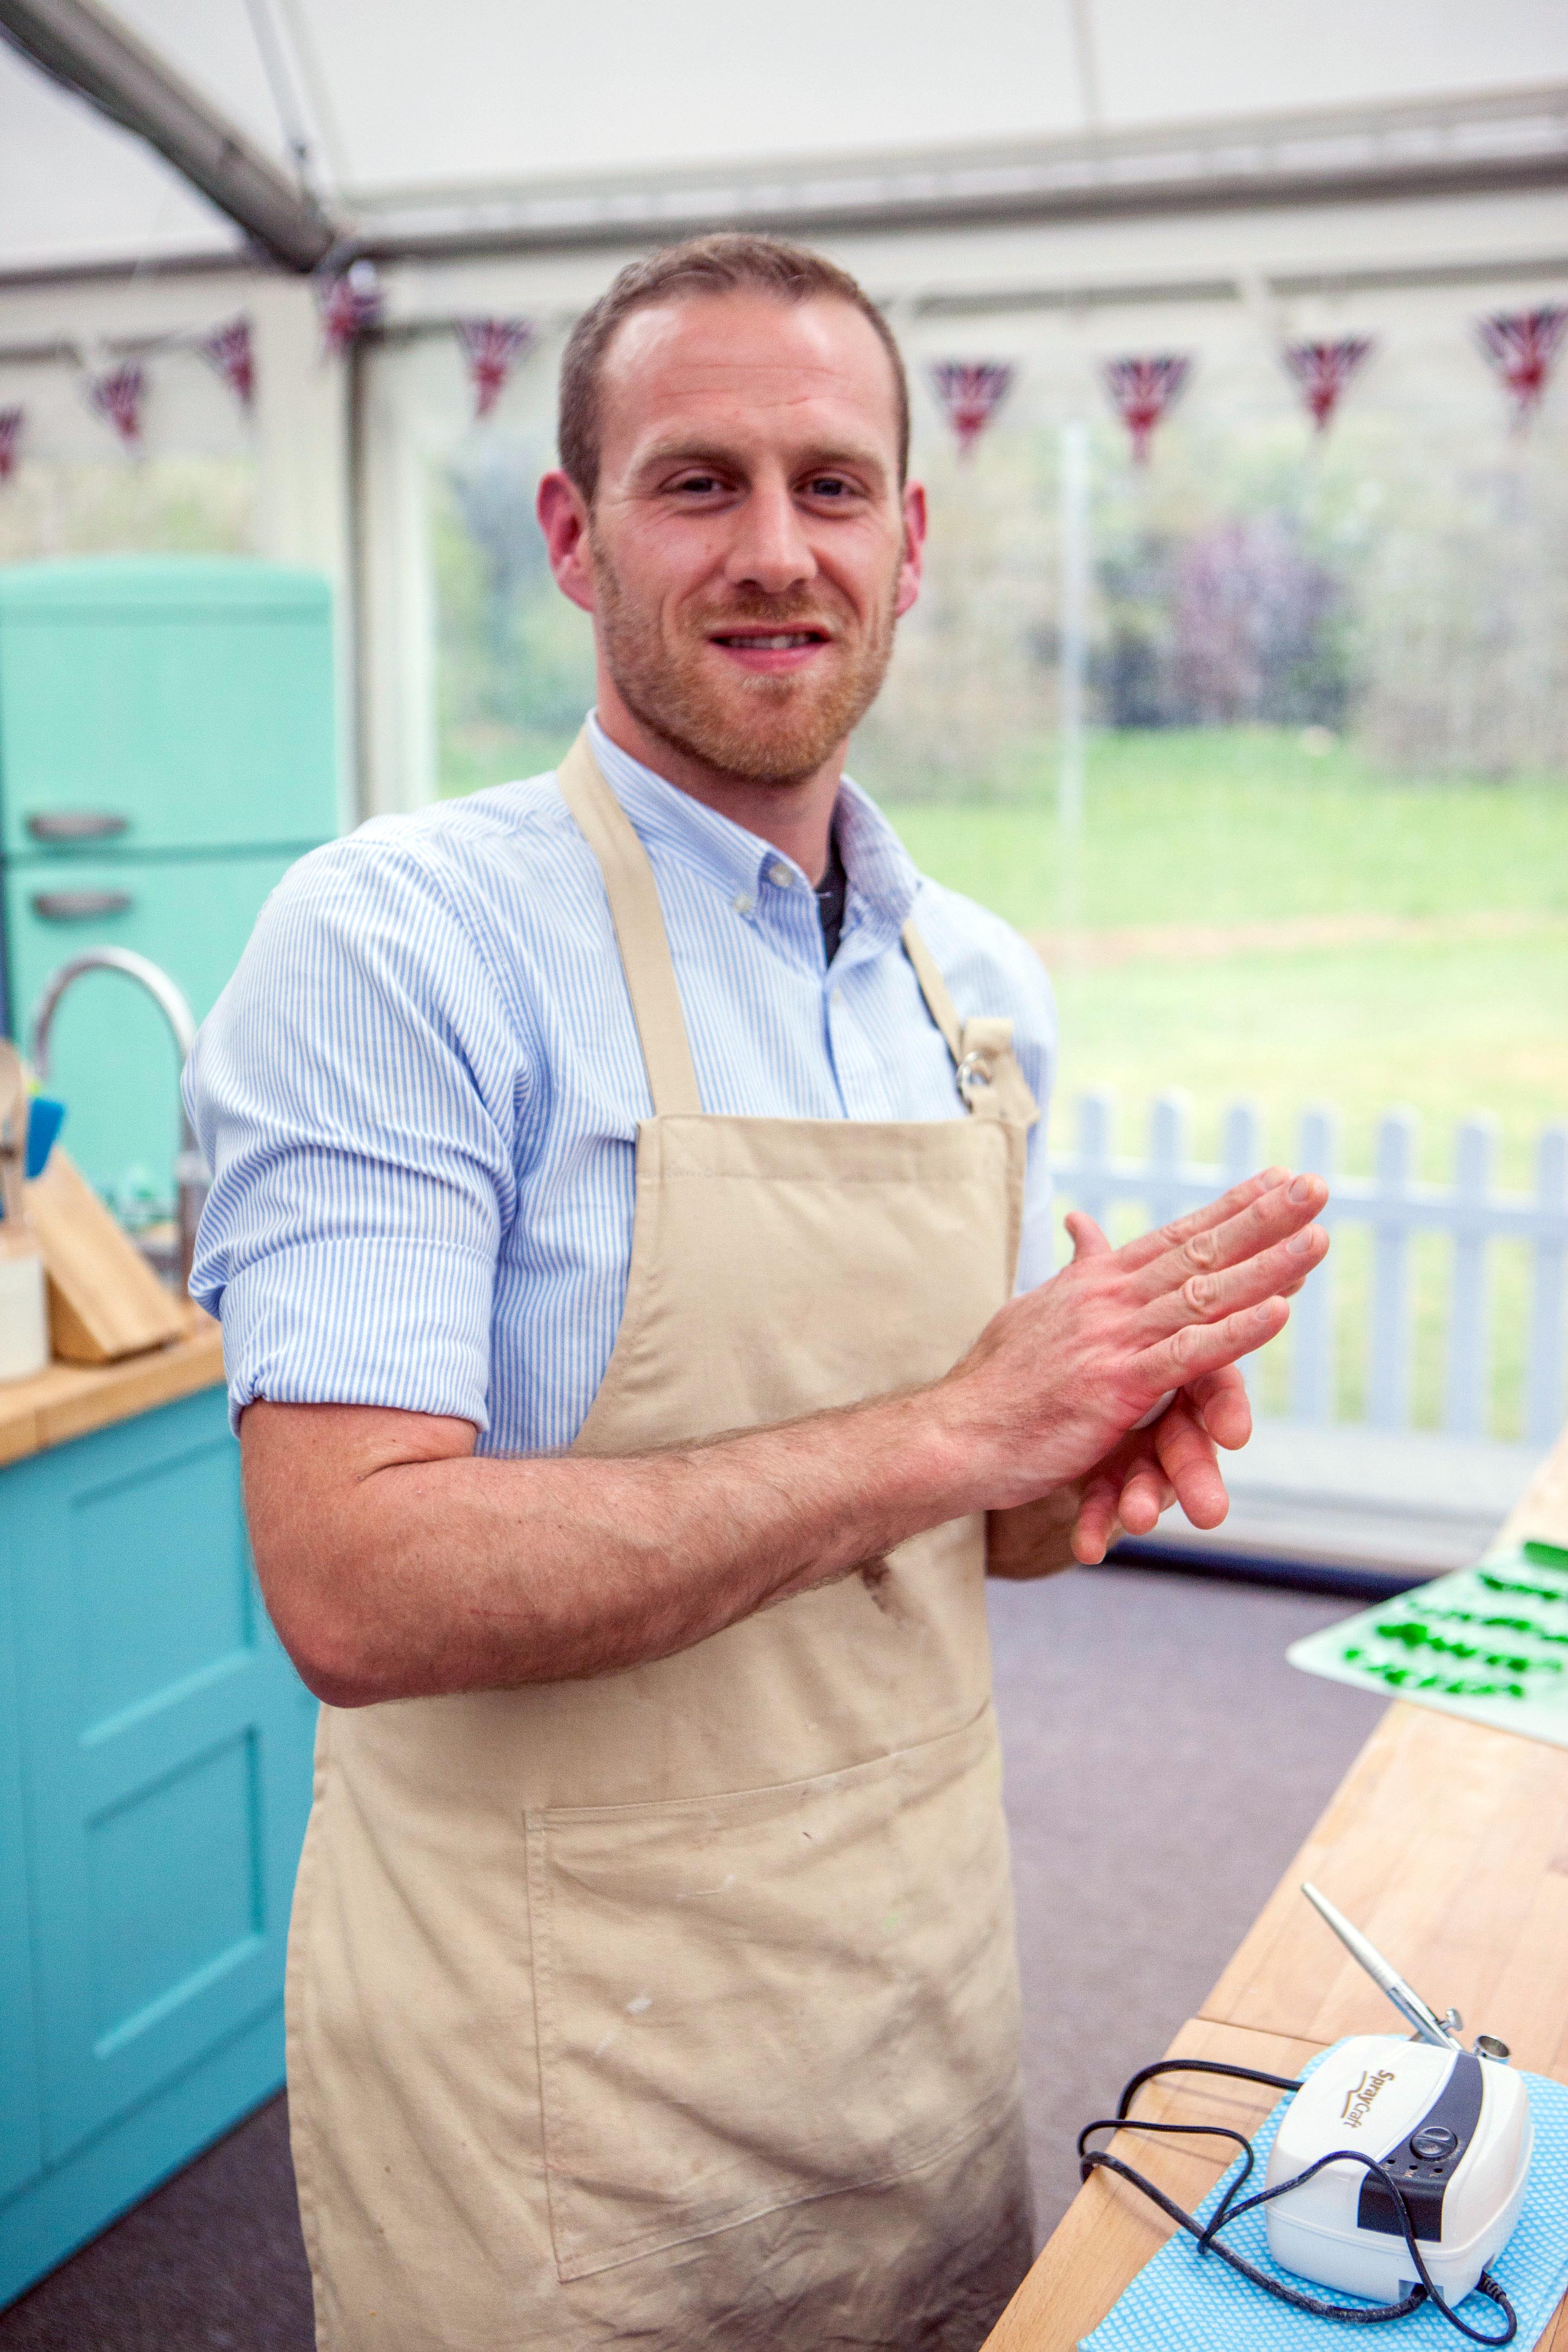 Steven on the Great British Bake Off